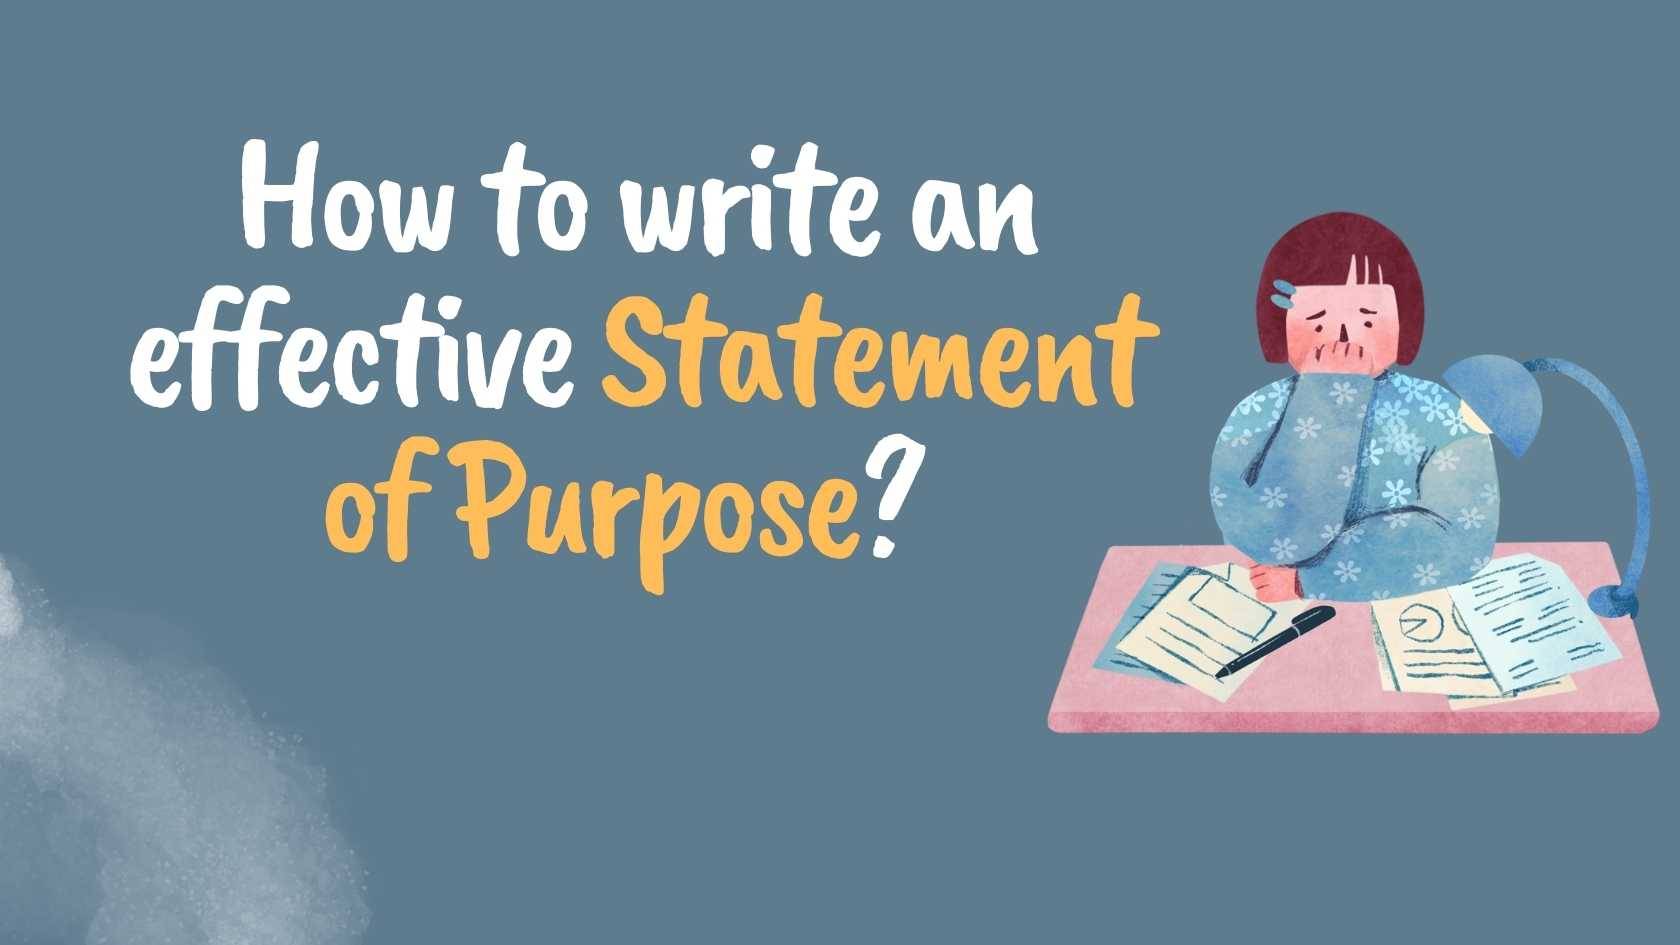 How to Write an effective Statement of Purpose (SOP)?